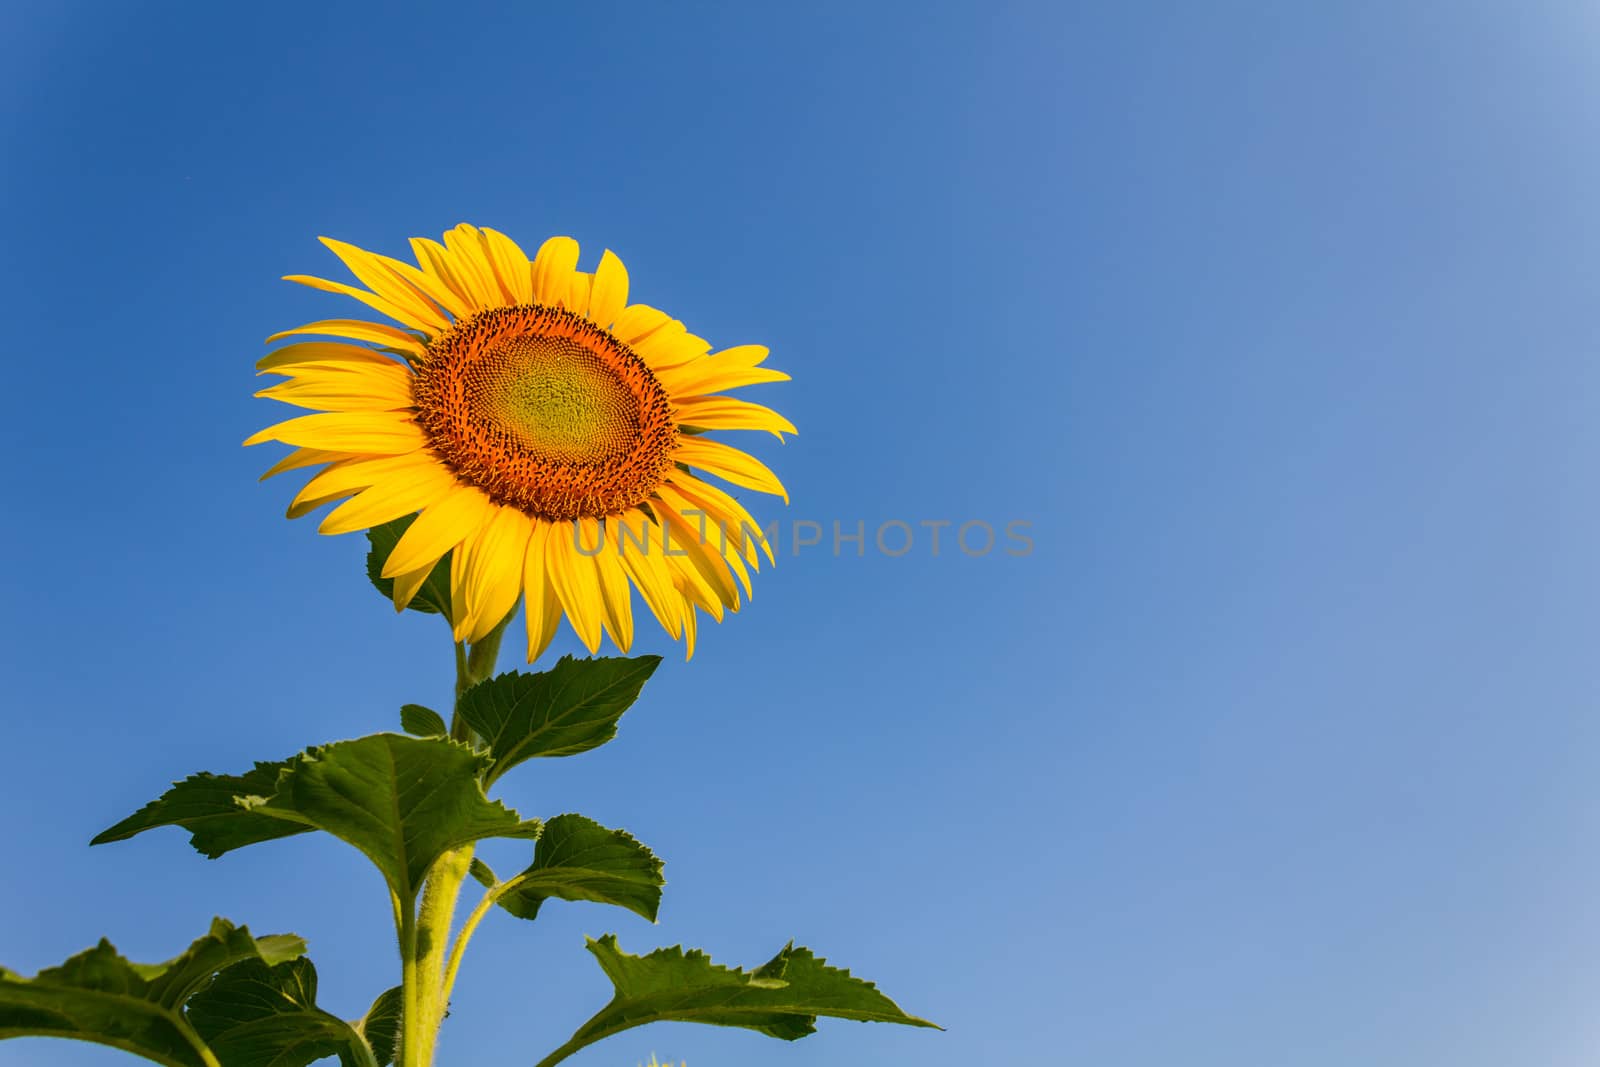 Blooming sunflower in the blue sky background